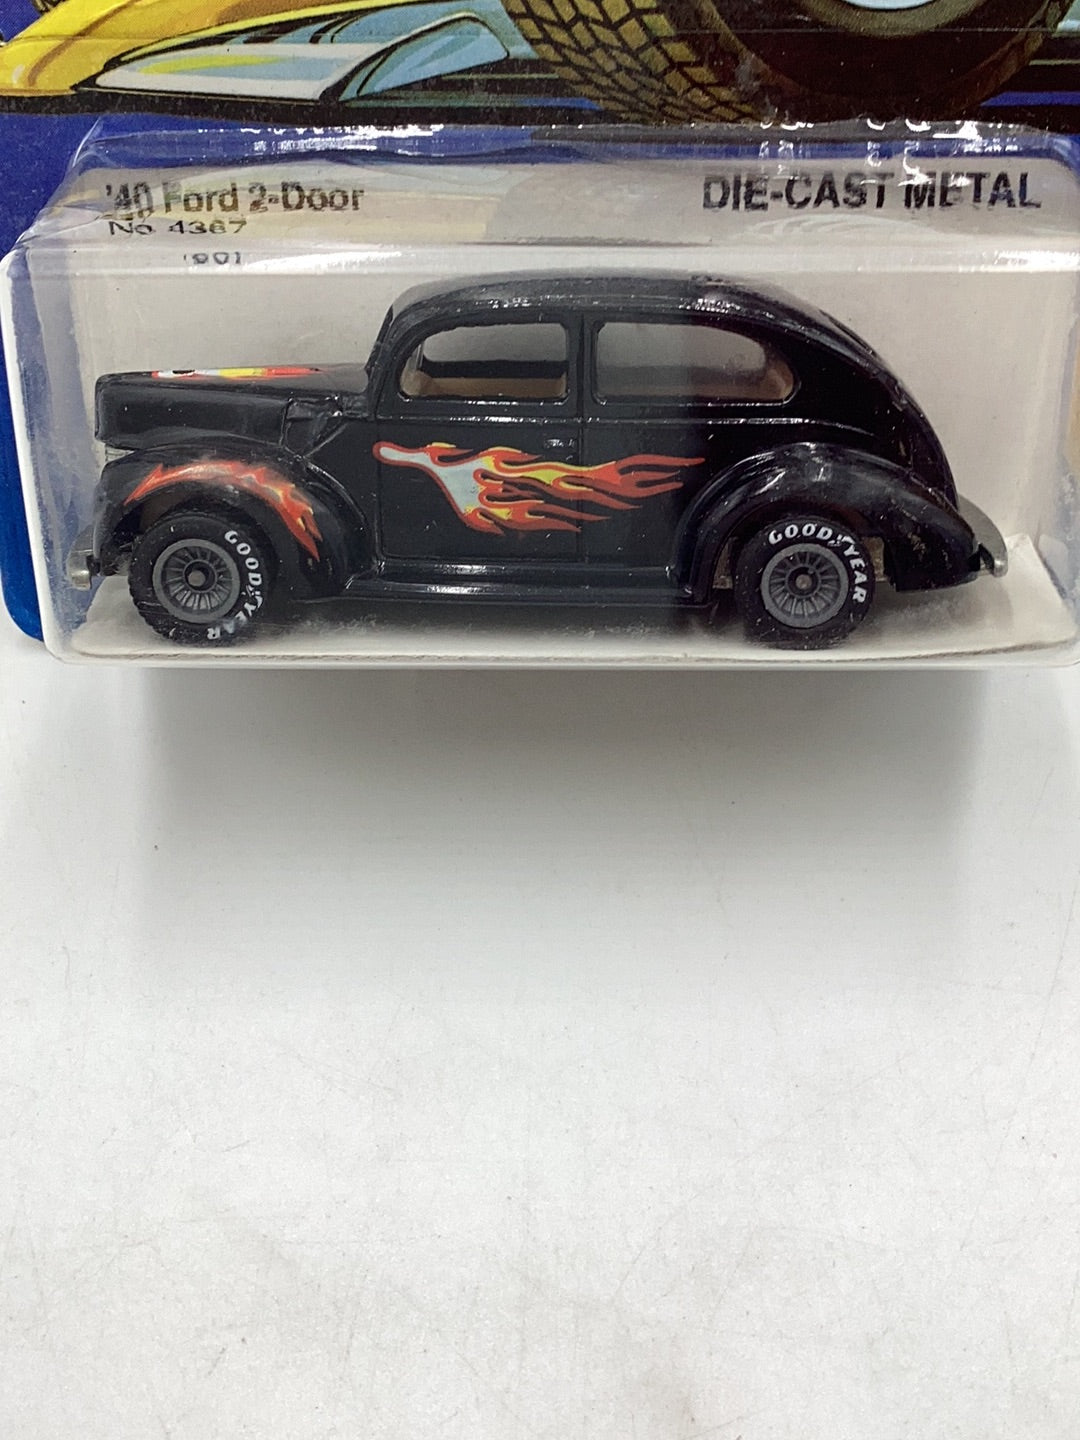 Hot Wheels Real Riders 40 Ford 2-door with protector